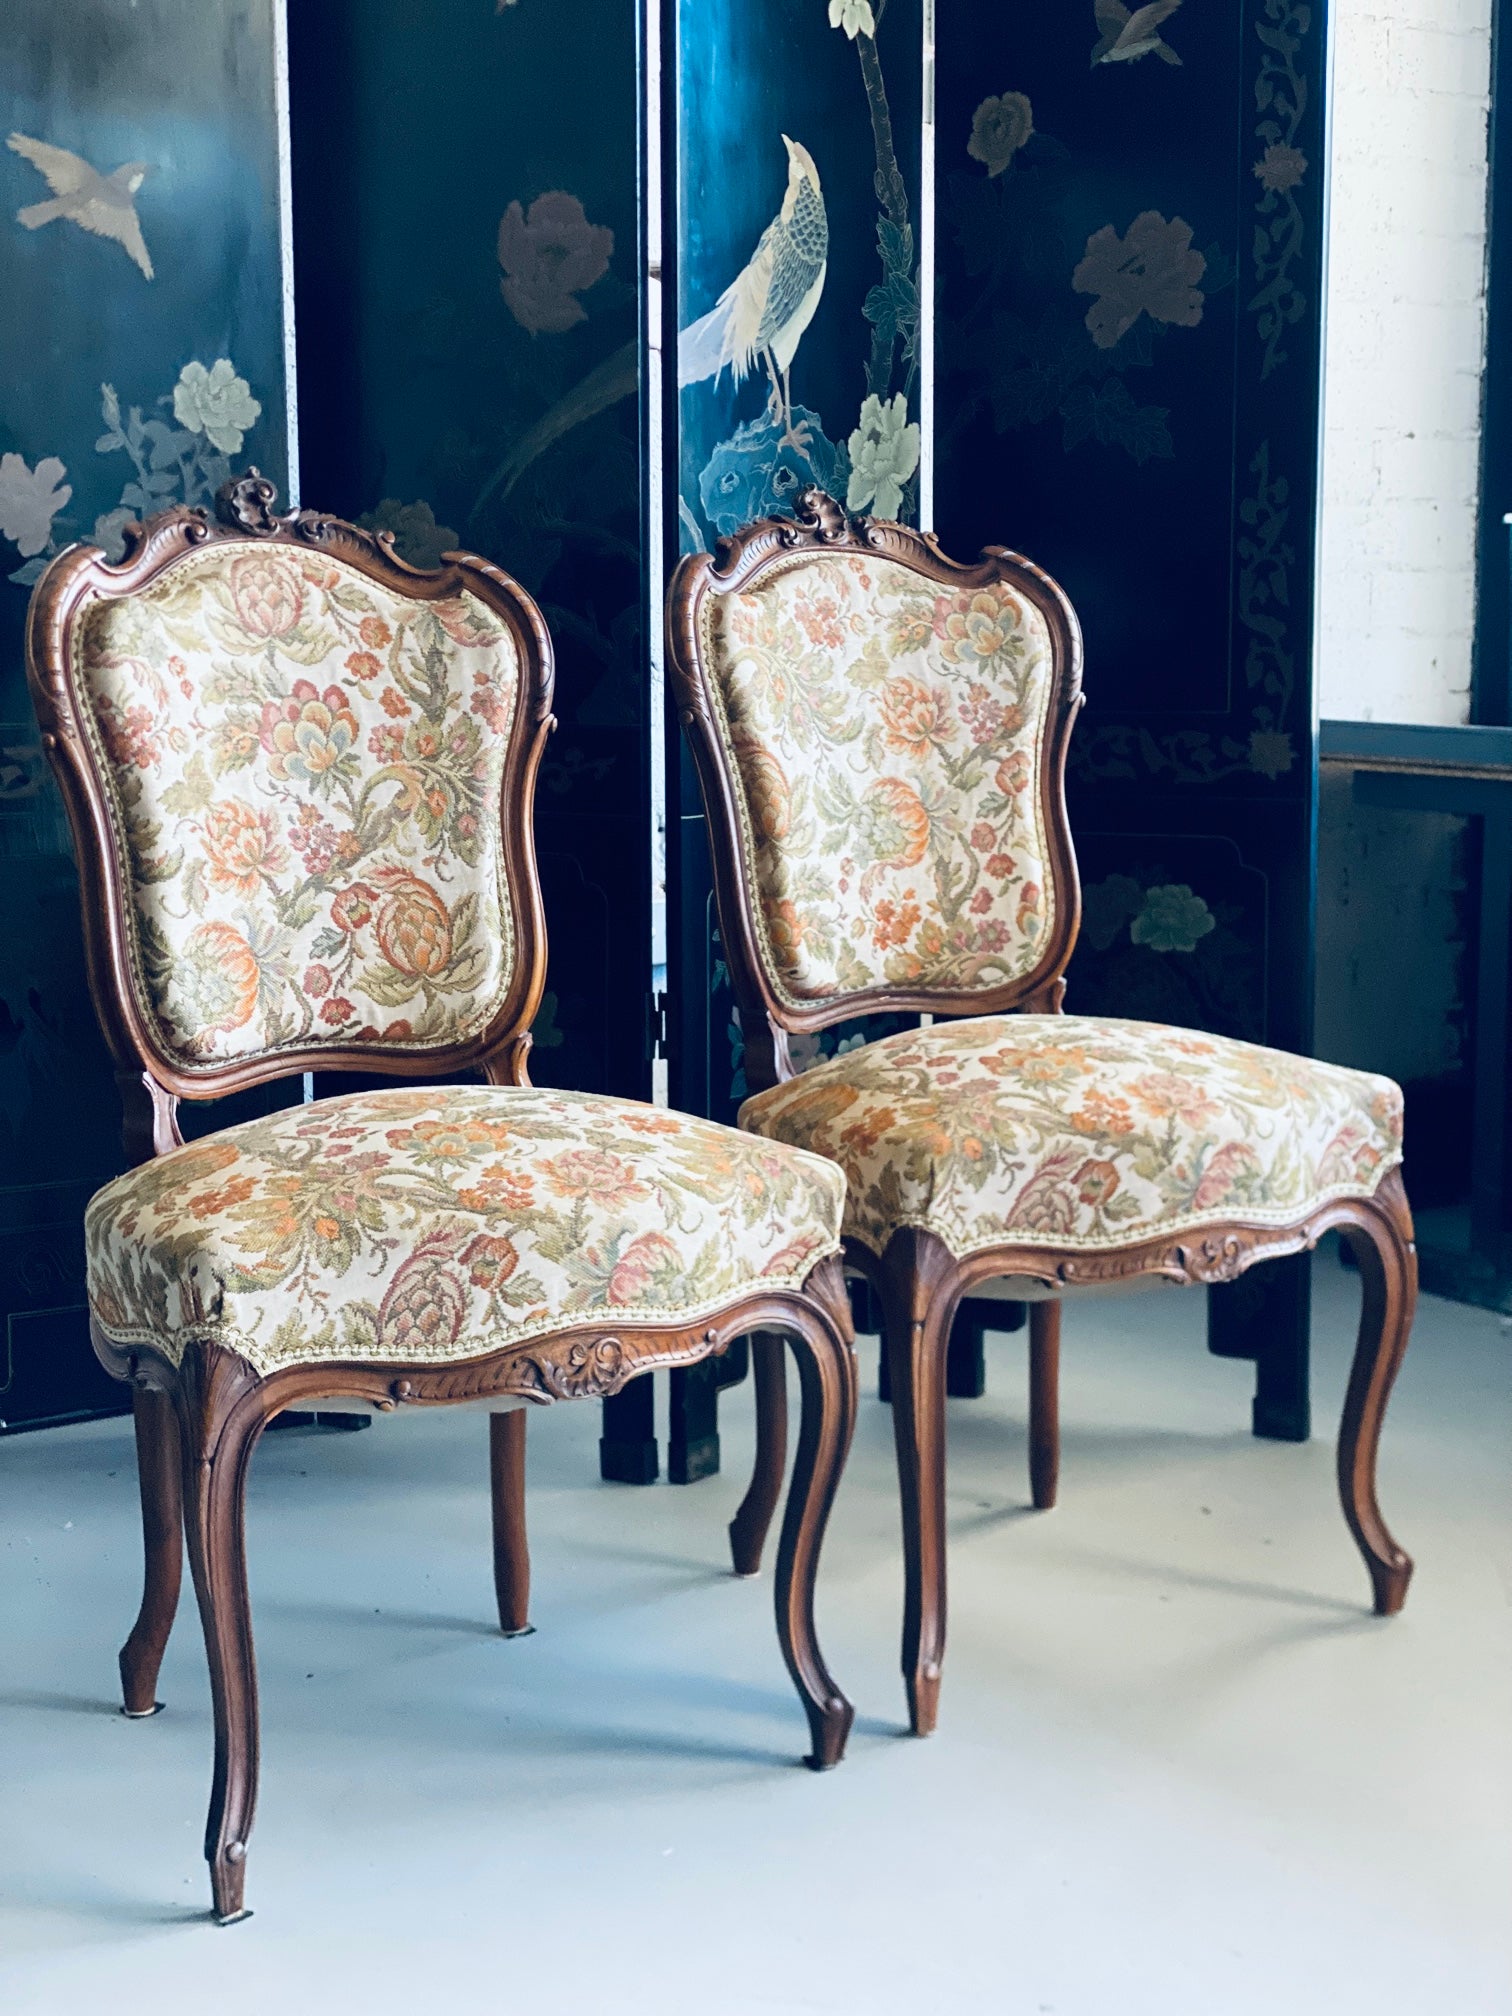 Pair of Vintage French Louis XVI Side Chairs